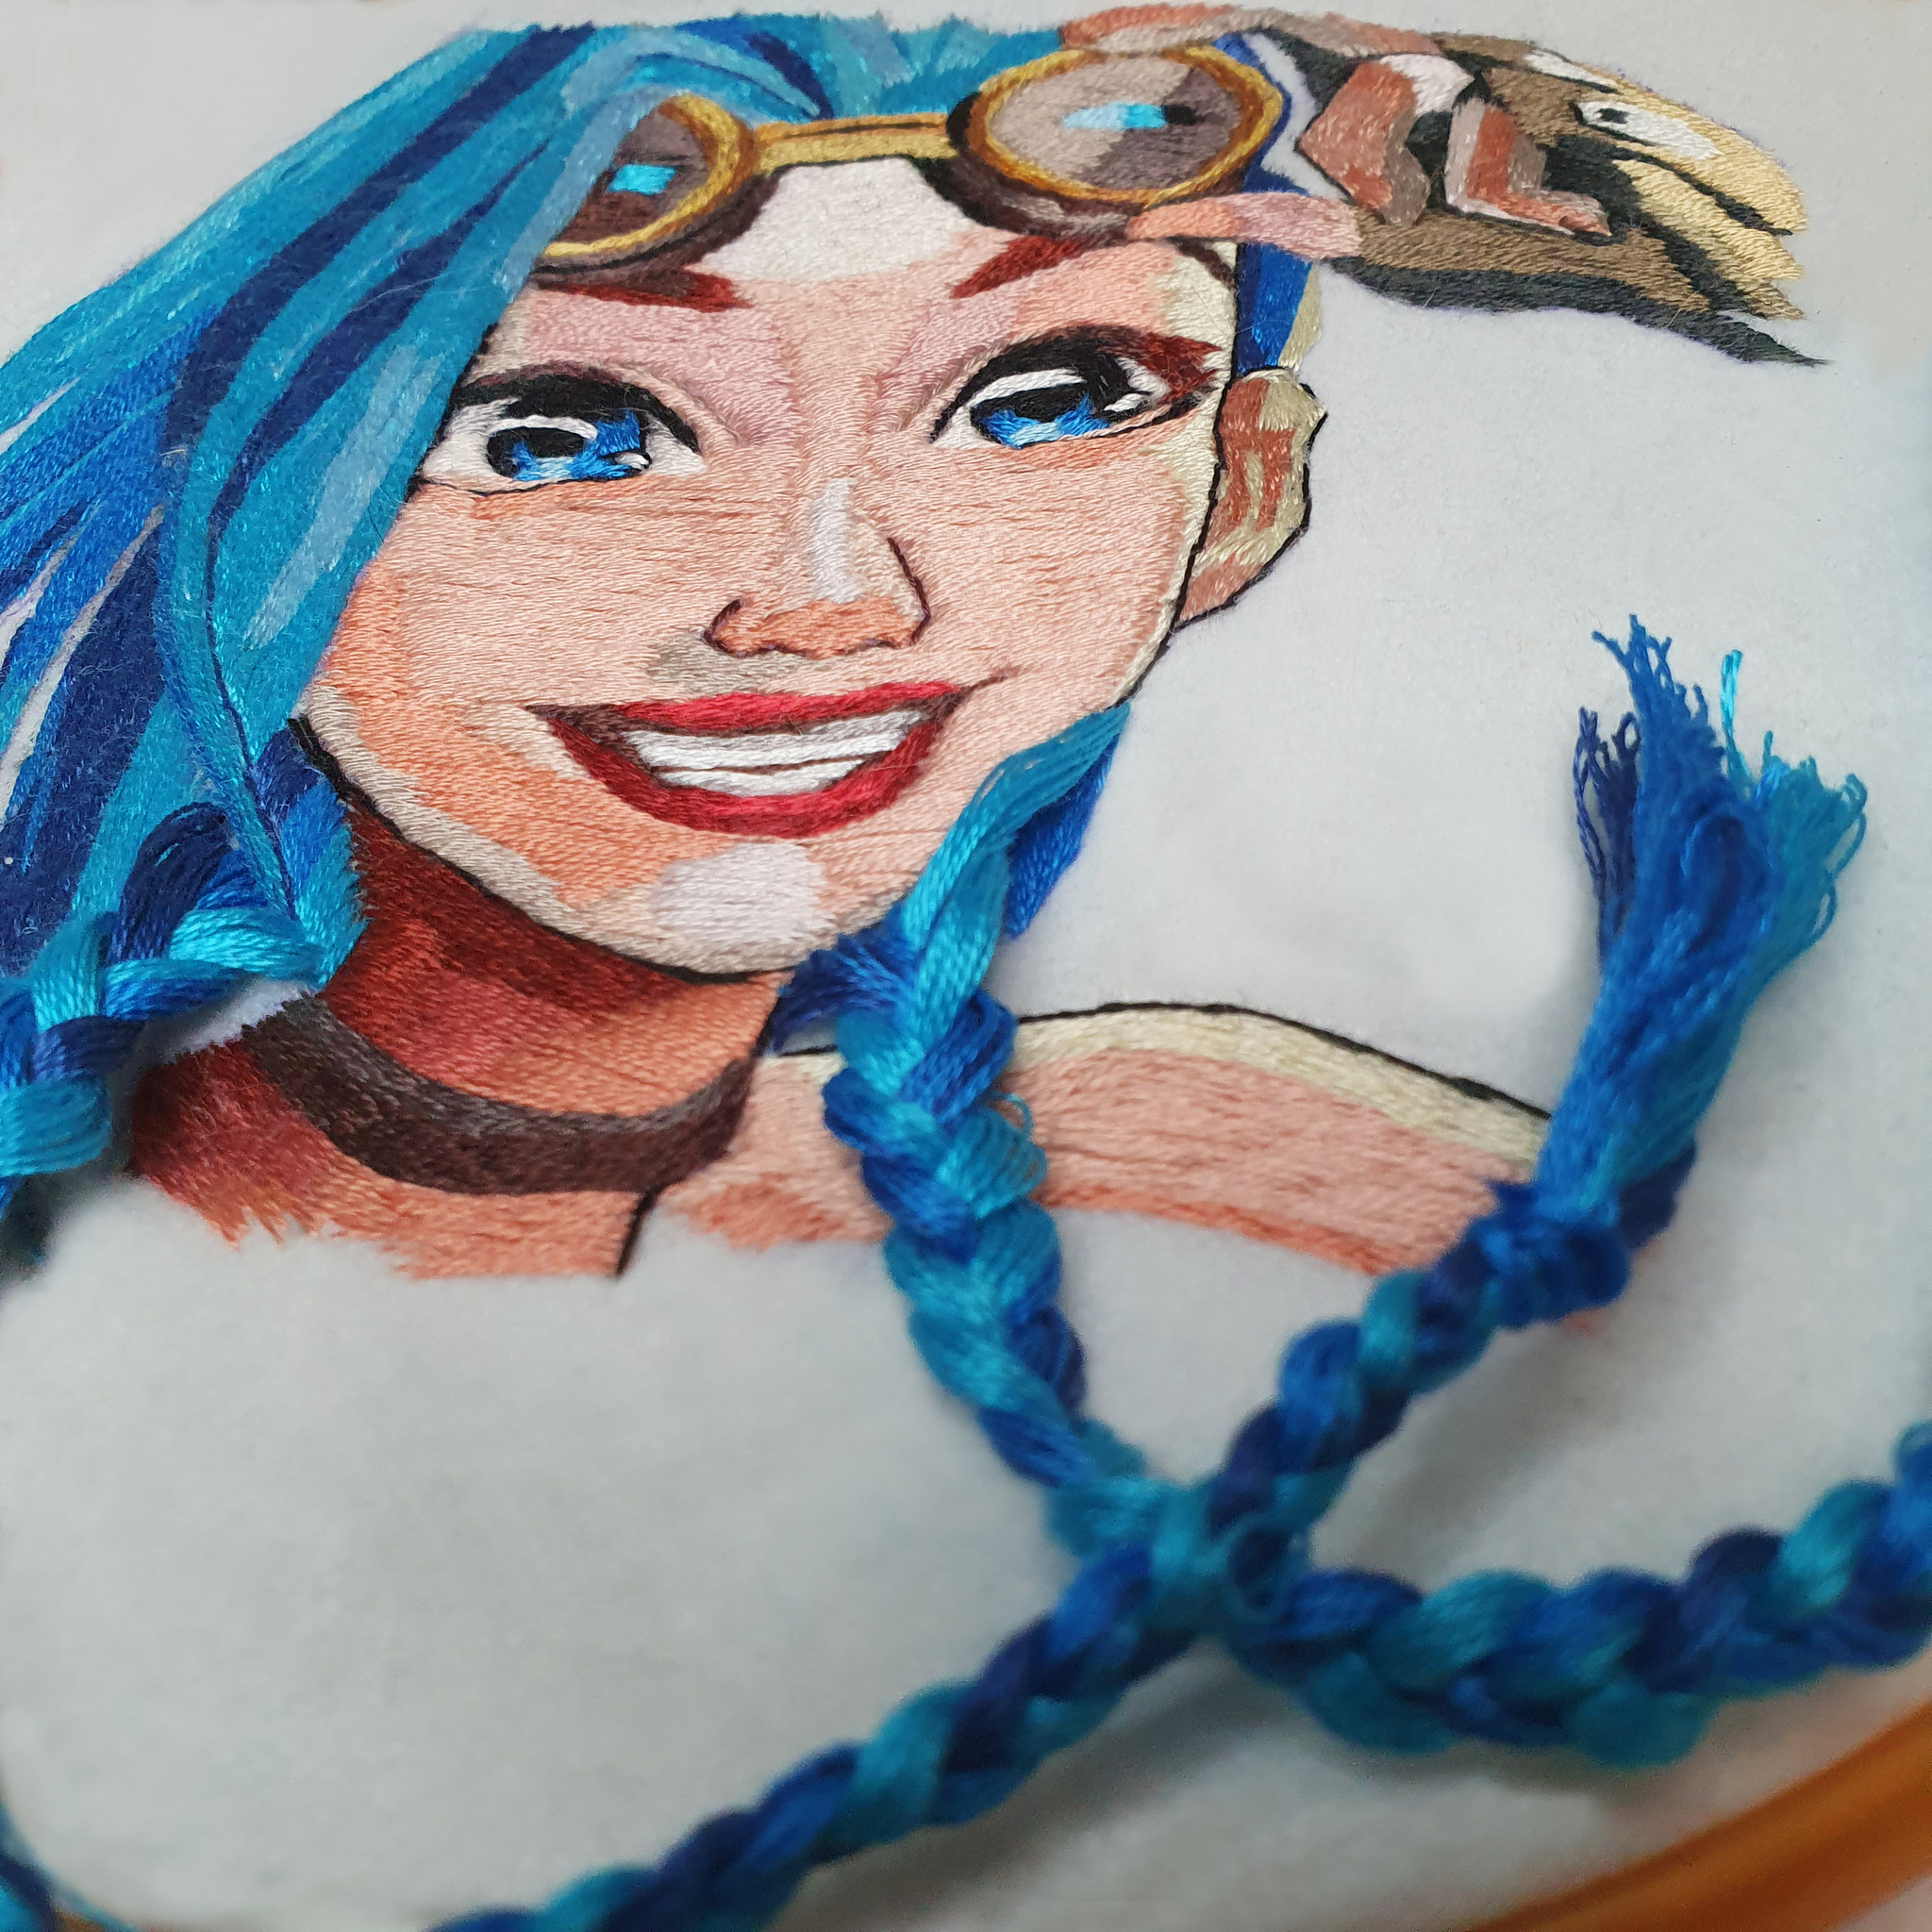 My favorite embroidery. Jinx of Arcane - My, Embroidery, Needlework, Handmade, Needlework without process, Jinx, Arcane, League of legends, Netflix, Anime, Satin stitch embroidery, Smooth, Art, Games, Gamers, Gamer Girls, Creation, Game art, Riot games, Longpost